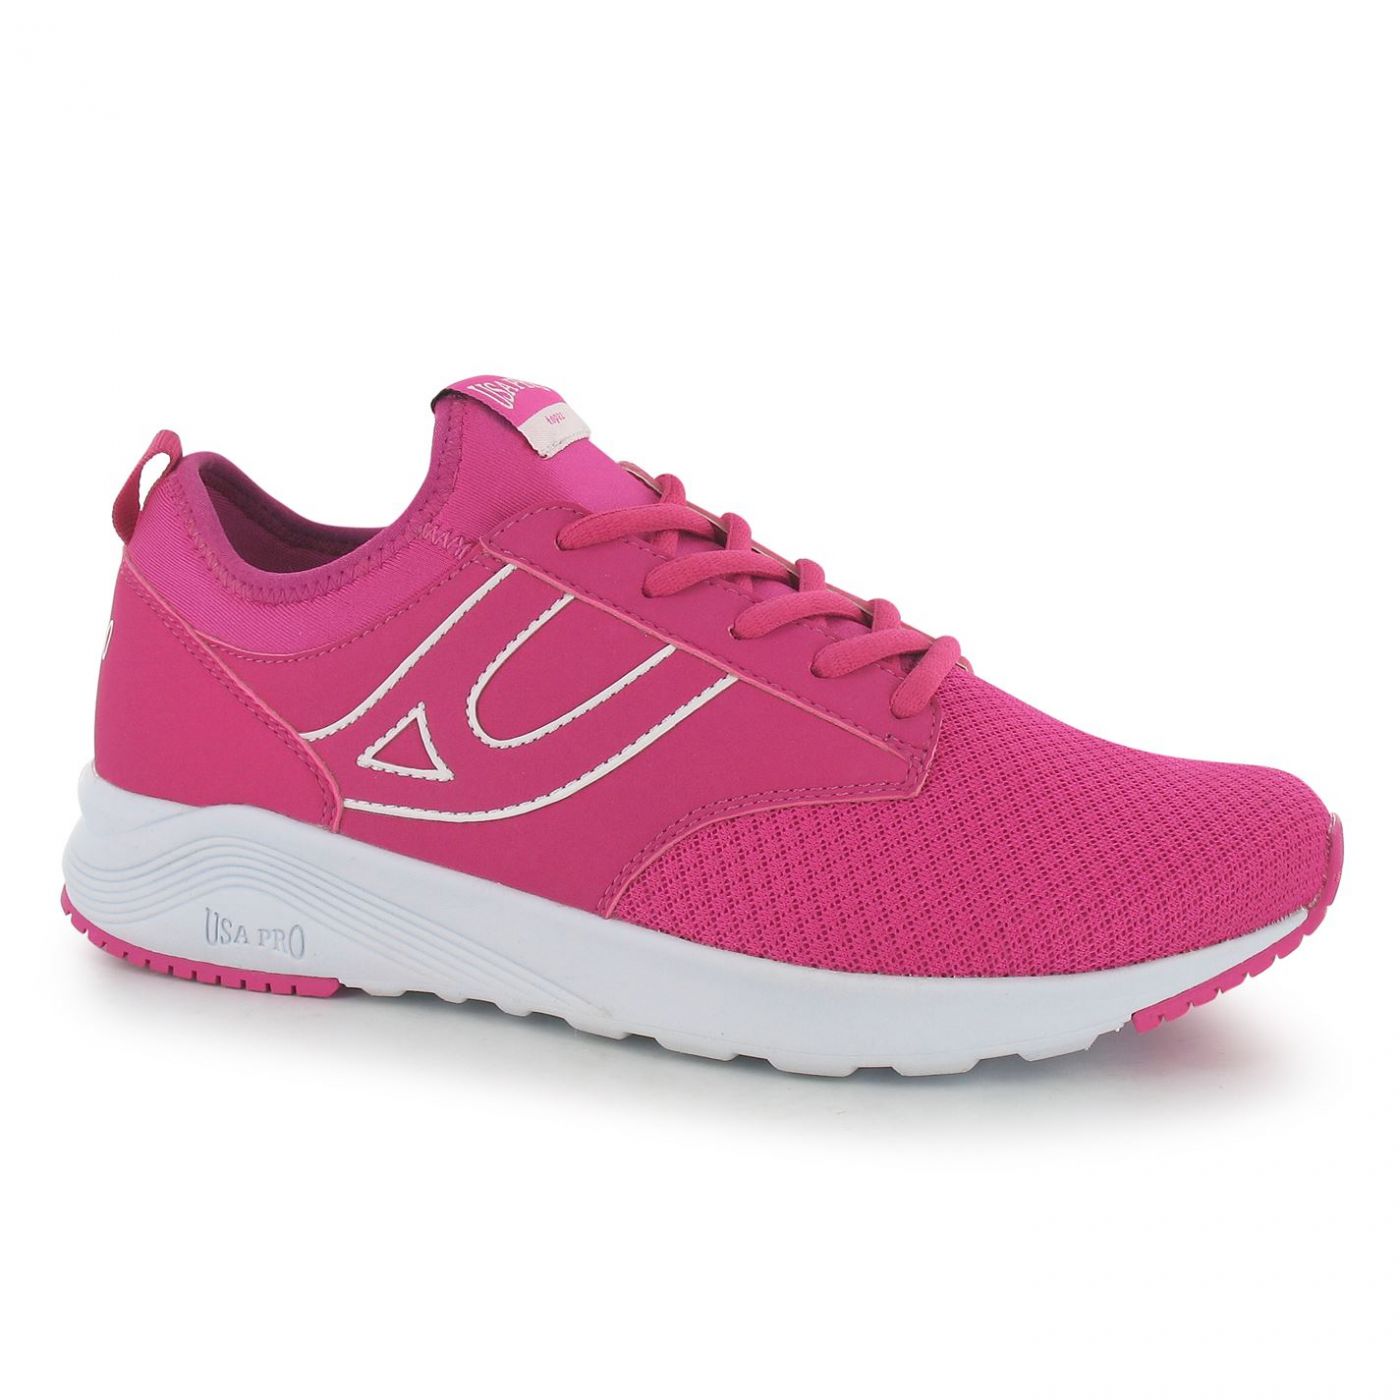 USA Pro Topaz Laced Trainers Ladies